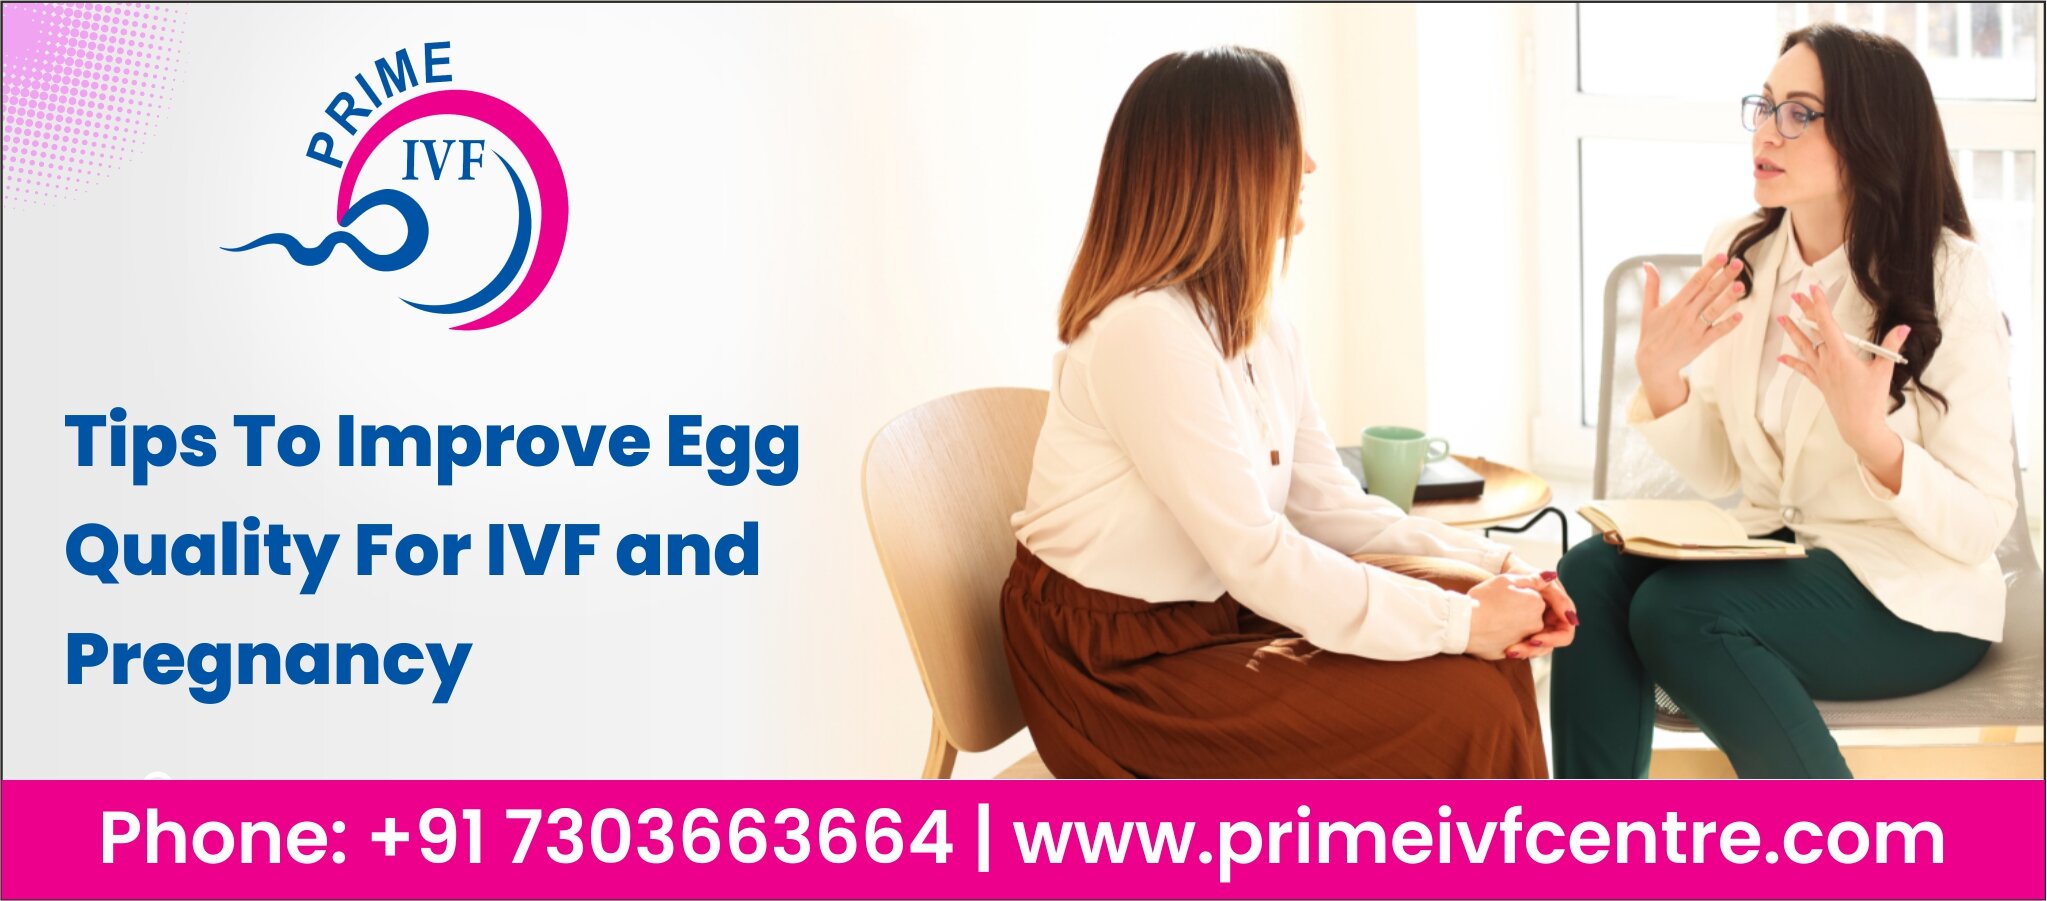 9 Tips To Improve Egg Quality For IVF & Pregnancy